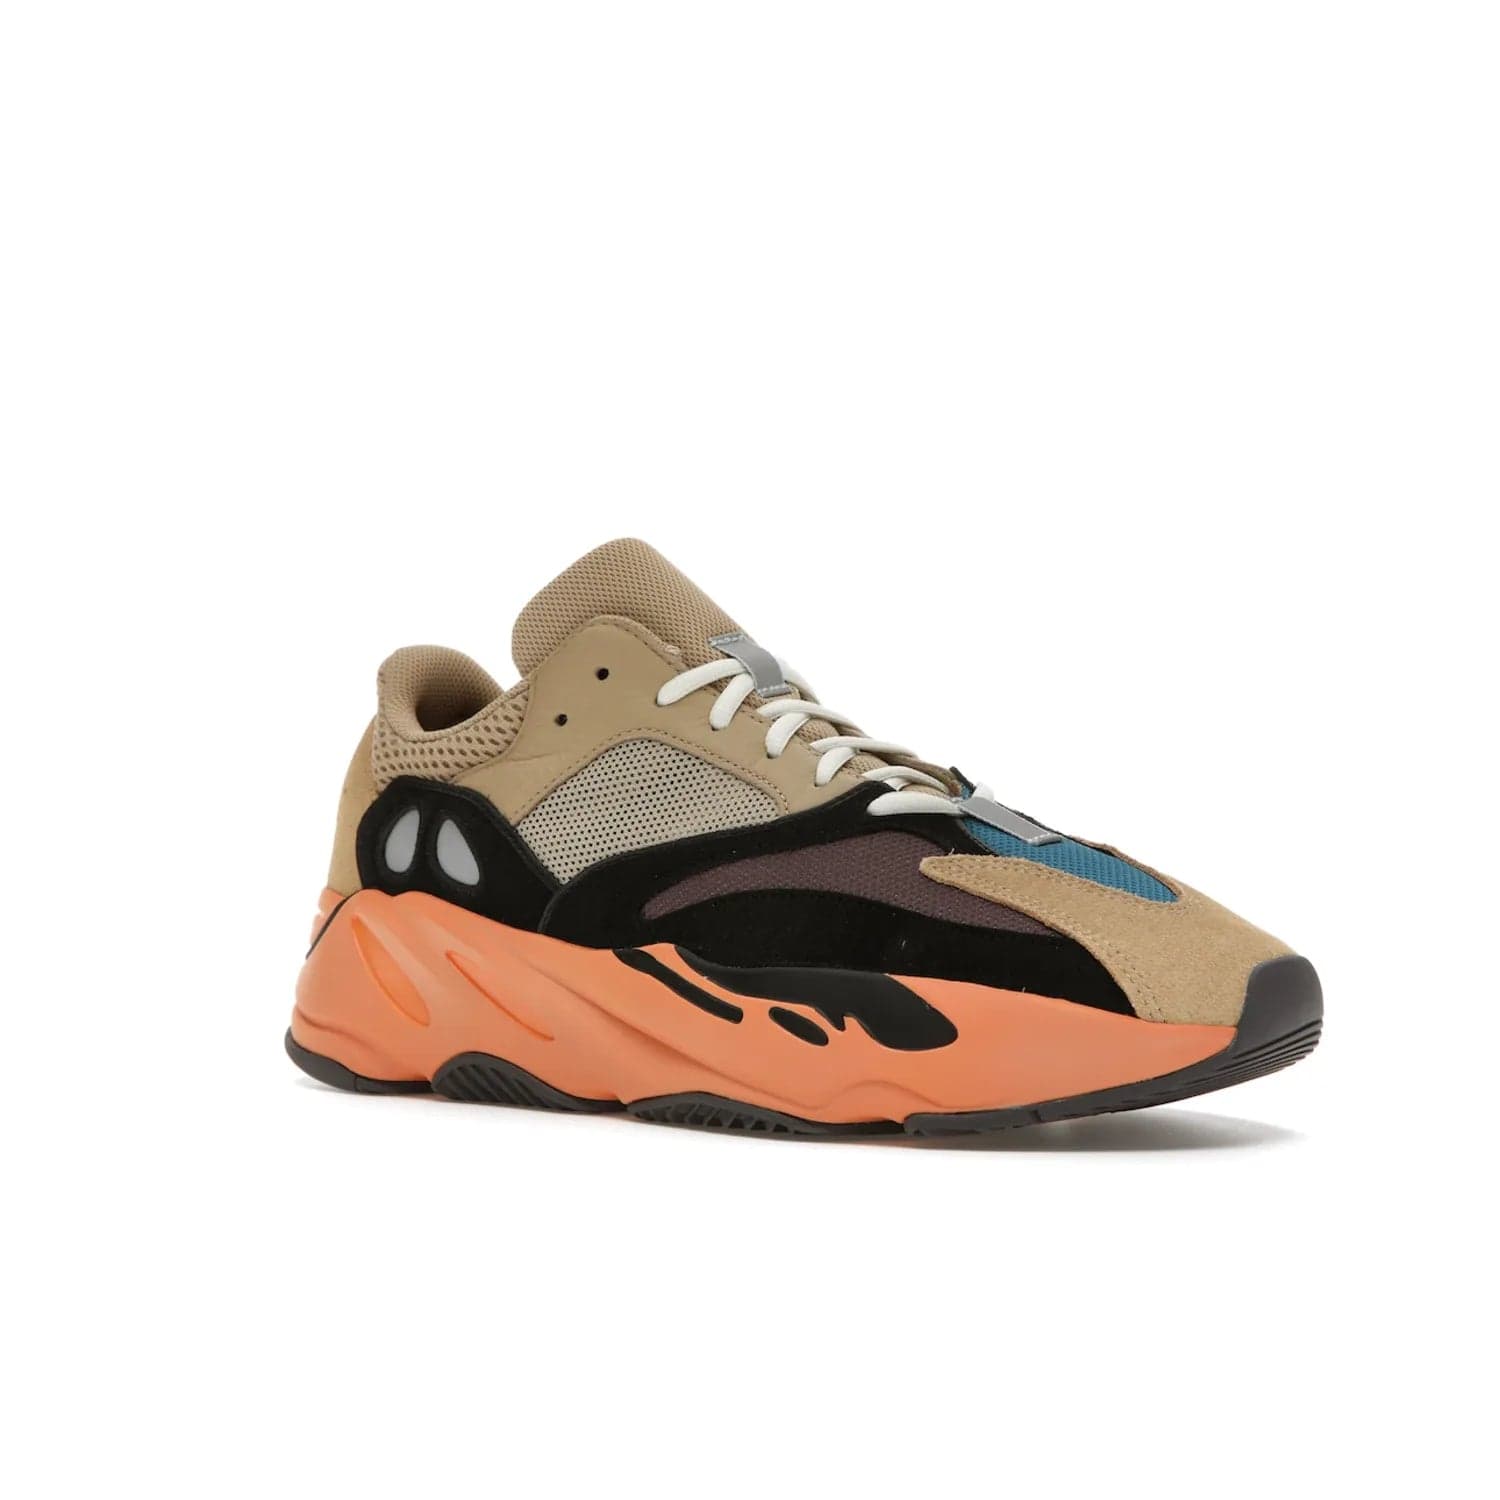 adidas Yeezy Boost 700 Enflame Amber - Image 5 - Only at www.BallersClubKickz.com - Adidas Yeezy Boost 700 Enflame Amber: Eye-catching design with pale yellow, brown, teal, and orange! Get yours in June 2021.